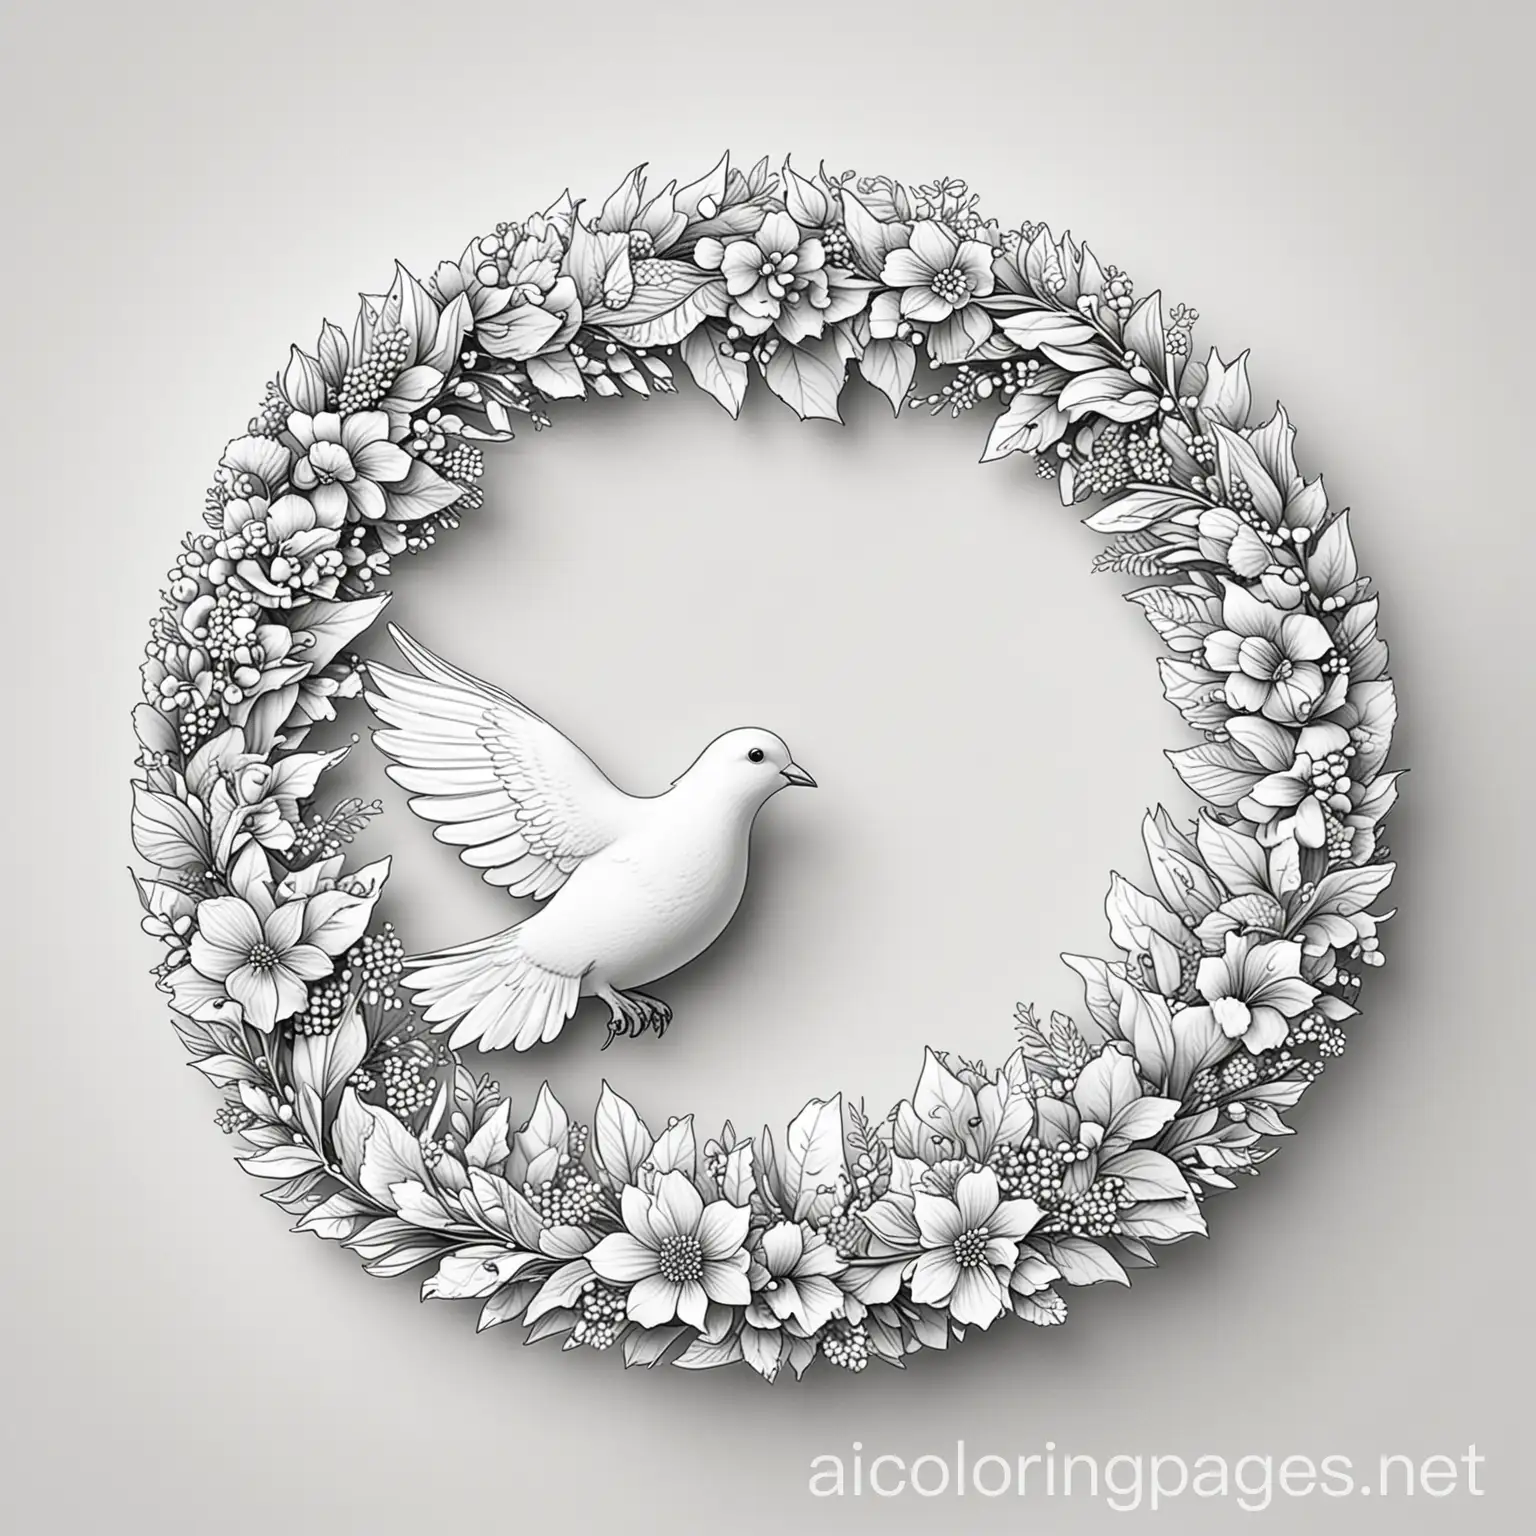 Circle flower garland dove, Coloring Page, black and white, line art, white background, Simplicity, Ample White Space. The background of the coloring page is plain white to make it easy for young children to color within the lines. The outlines of all the subjects are easy to distinguish, making it simple for kids to color without too much difficulty